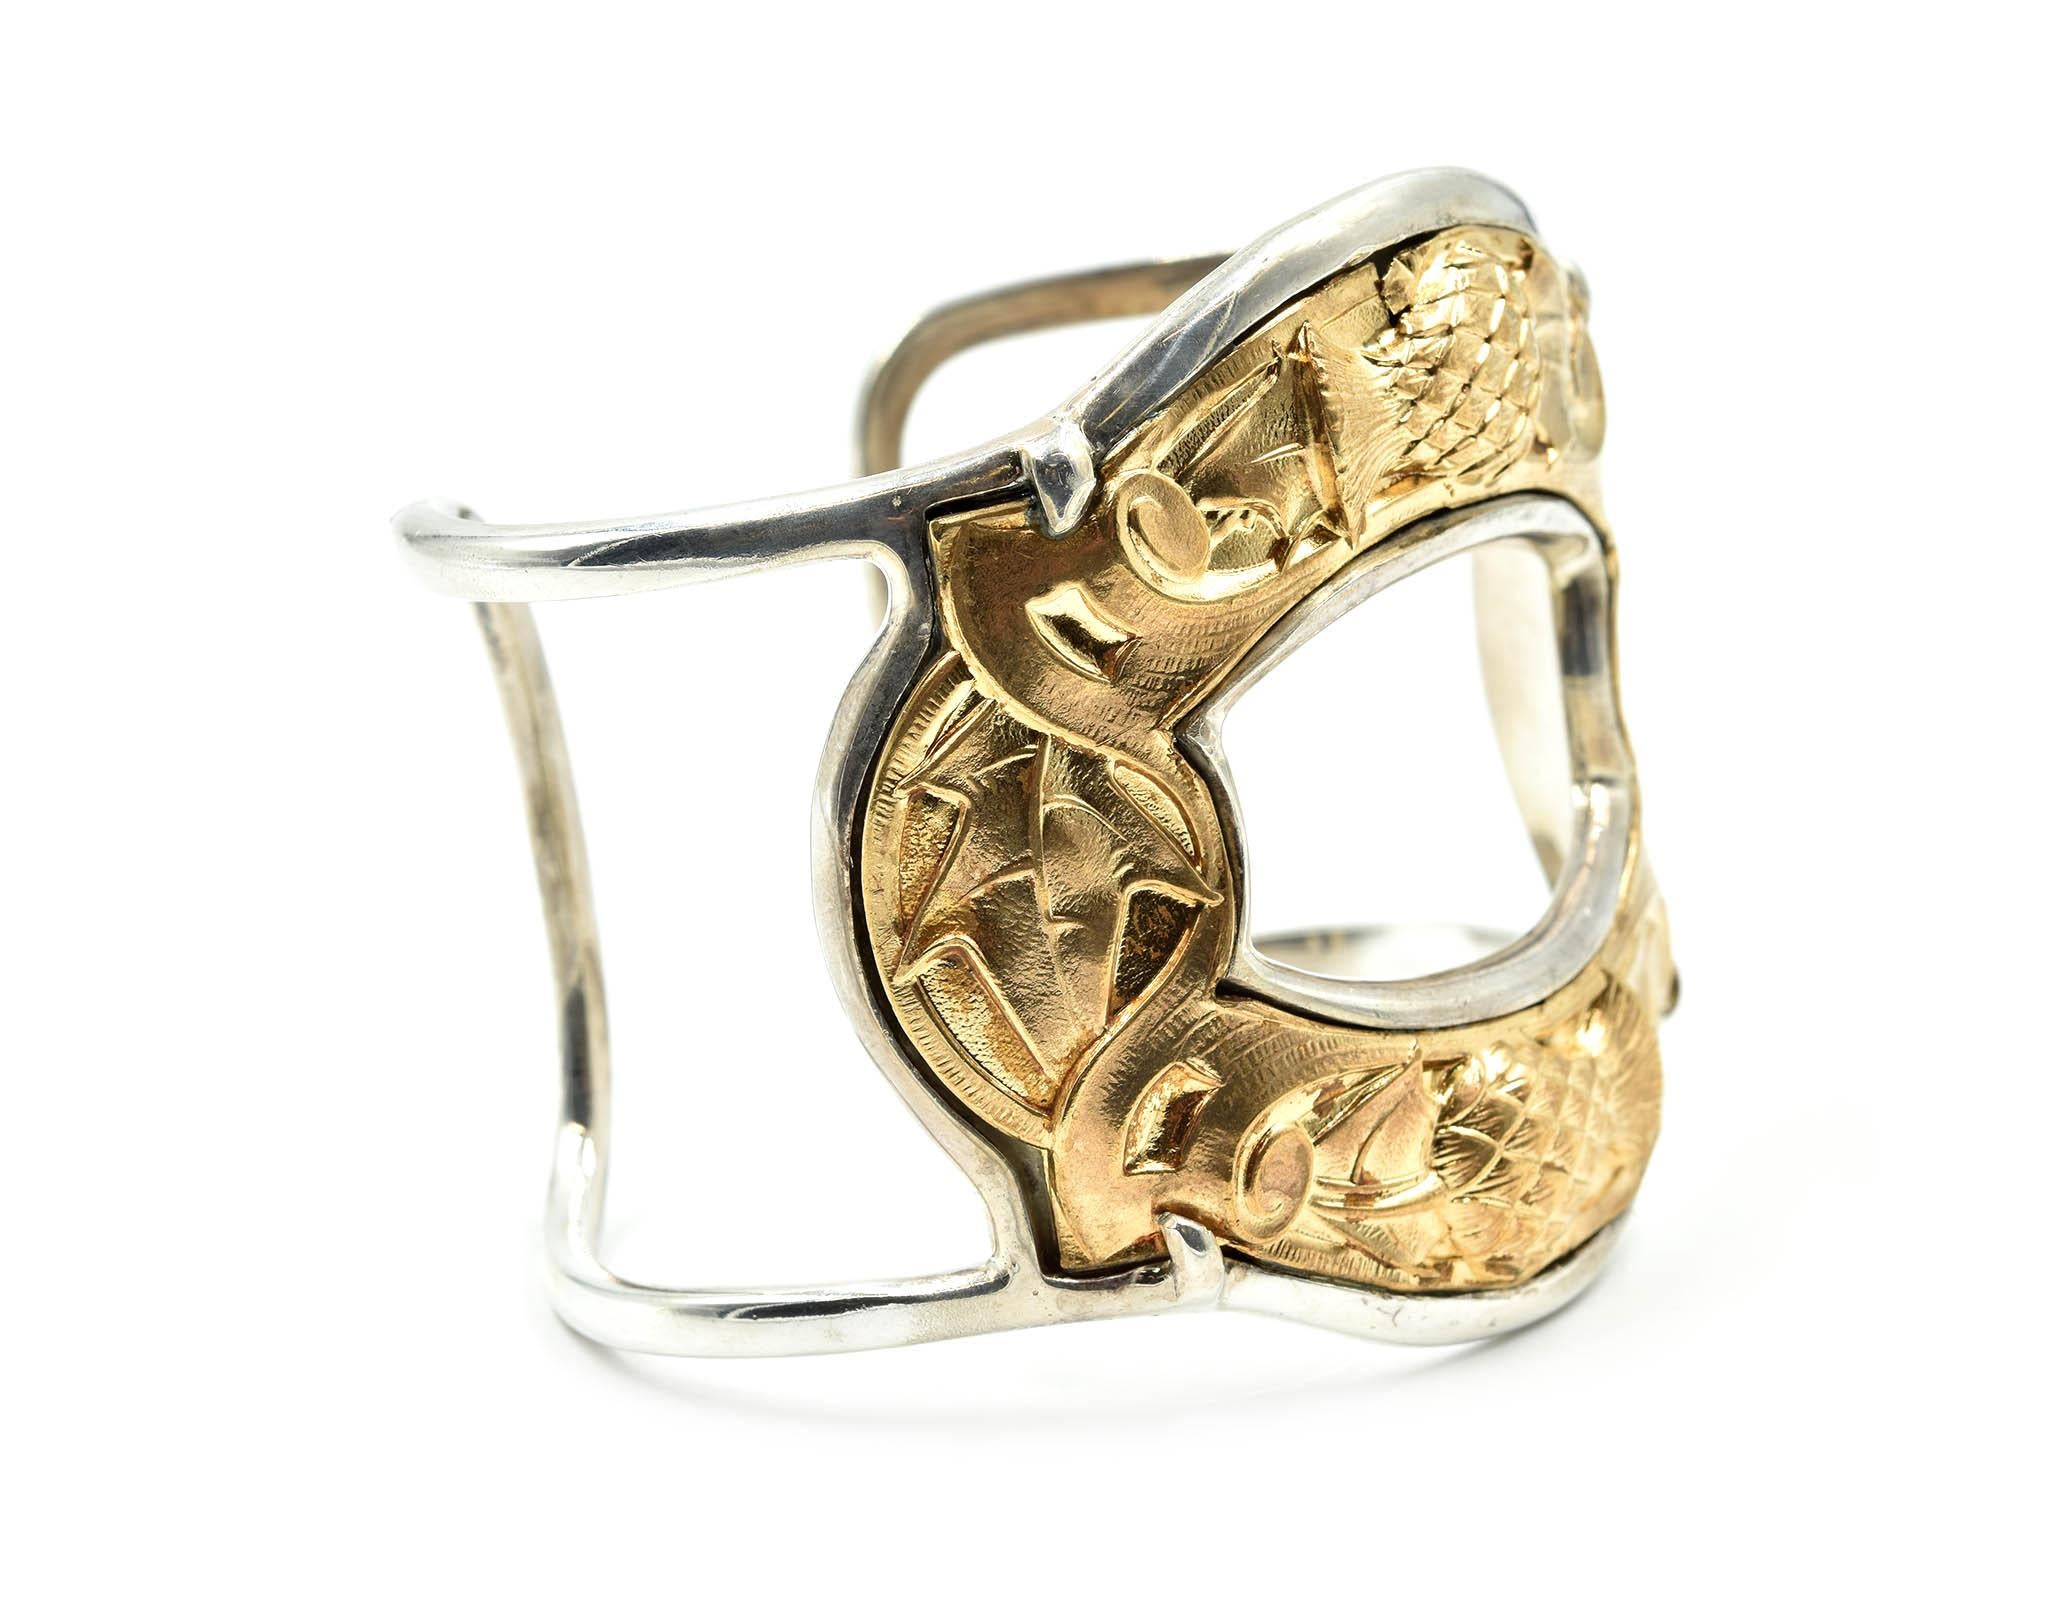 Designer: Barry Brinker
Material: sterling silver and gold vermeil
Dimensions: bangle will fit up to 7.75-inch wrist and the bangle is 2 ½ inches wide
Weight: 86.00 grams
